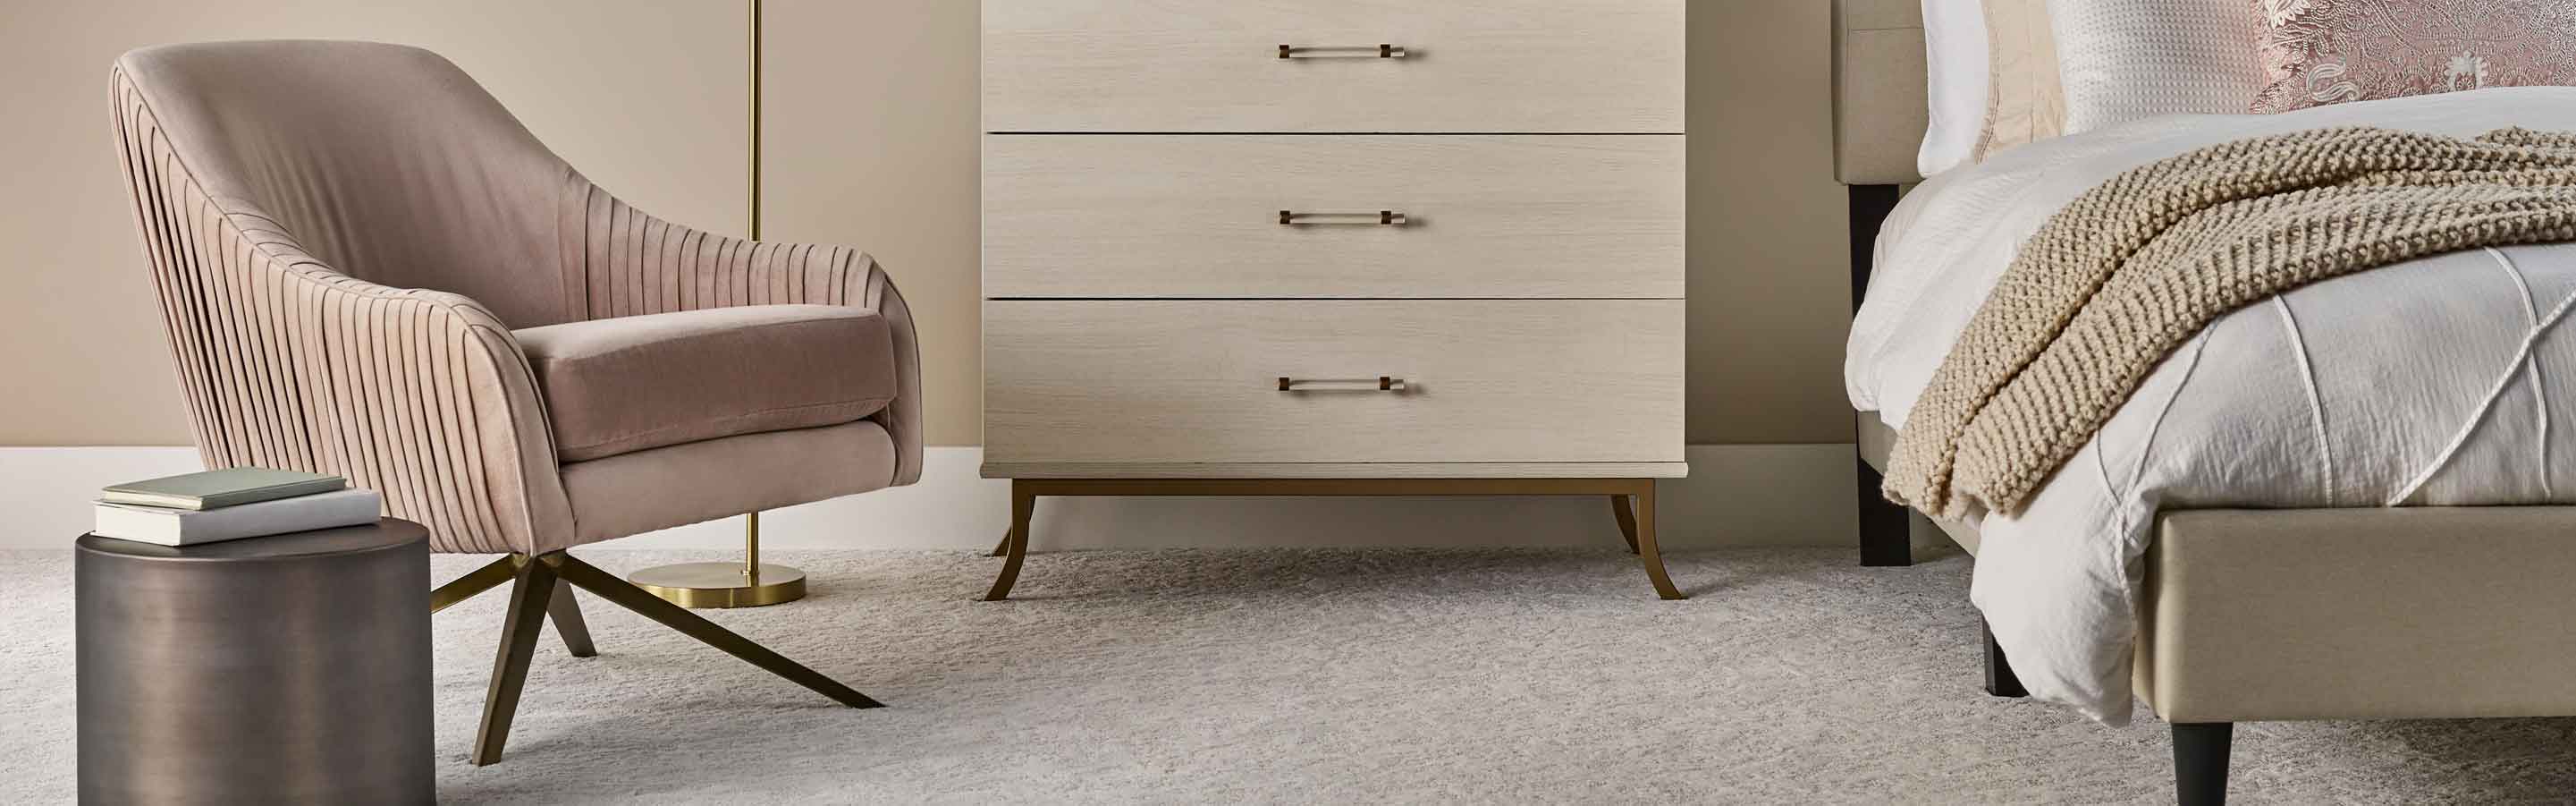 light carpet in bedroom with cream fabric bed and light wood midcentury modern end table